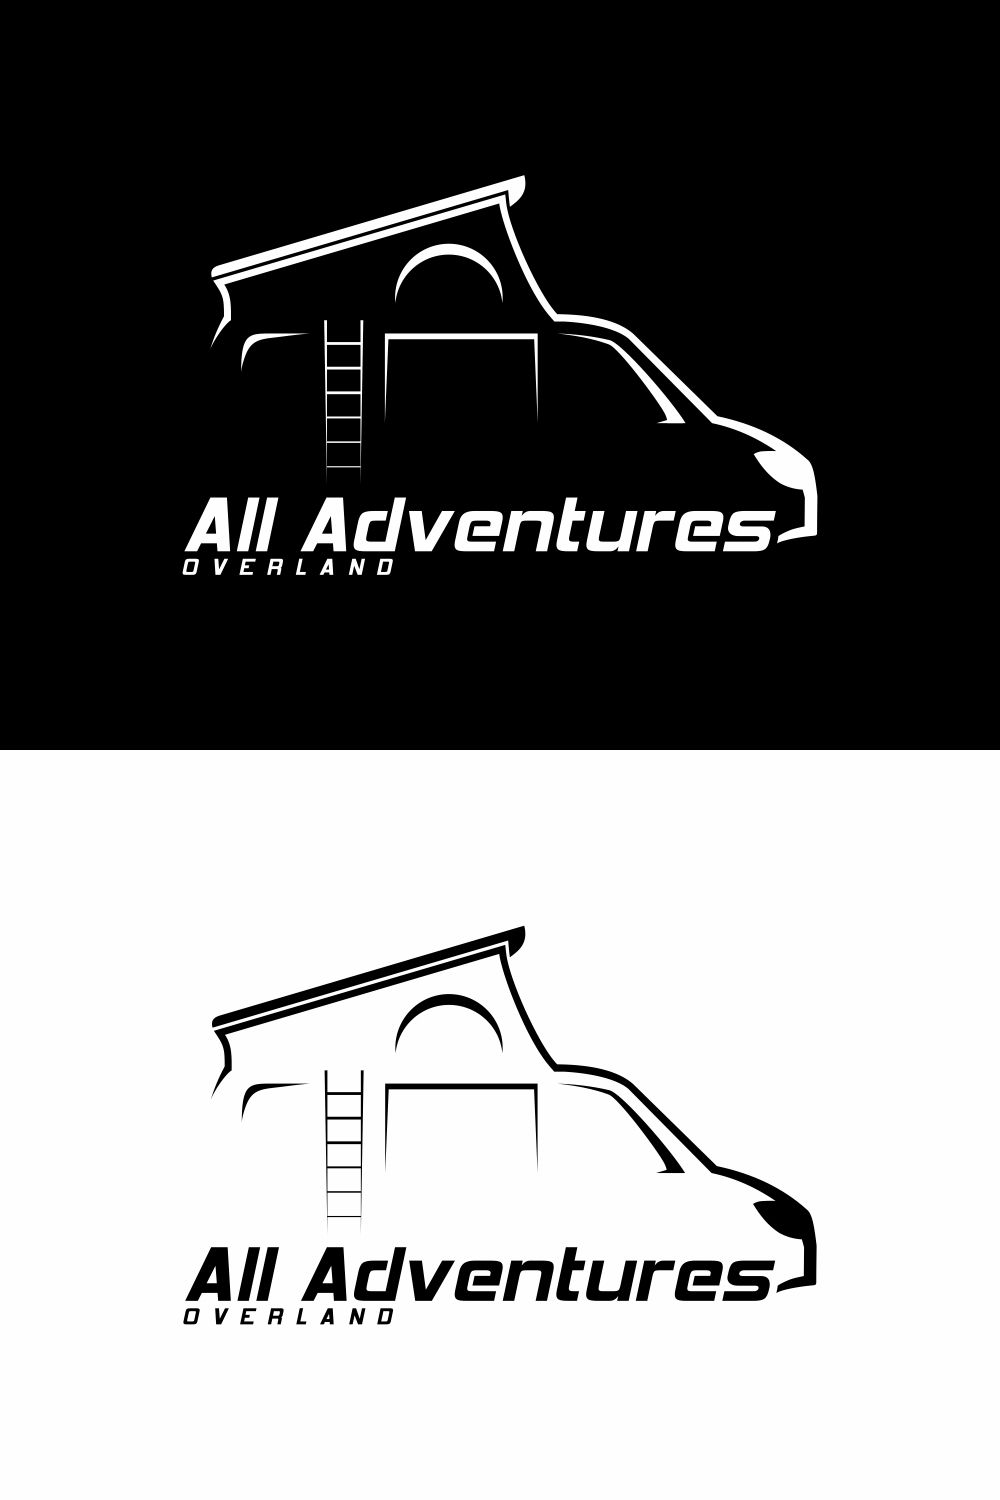 Camper van or recreational vehicle (RV) adventure car logo template, travel and recreation vector design - only 7$ pinterest preview image.